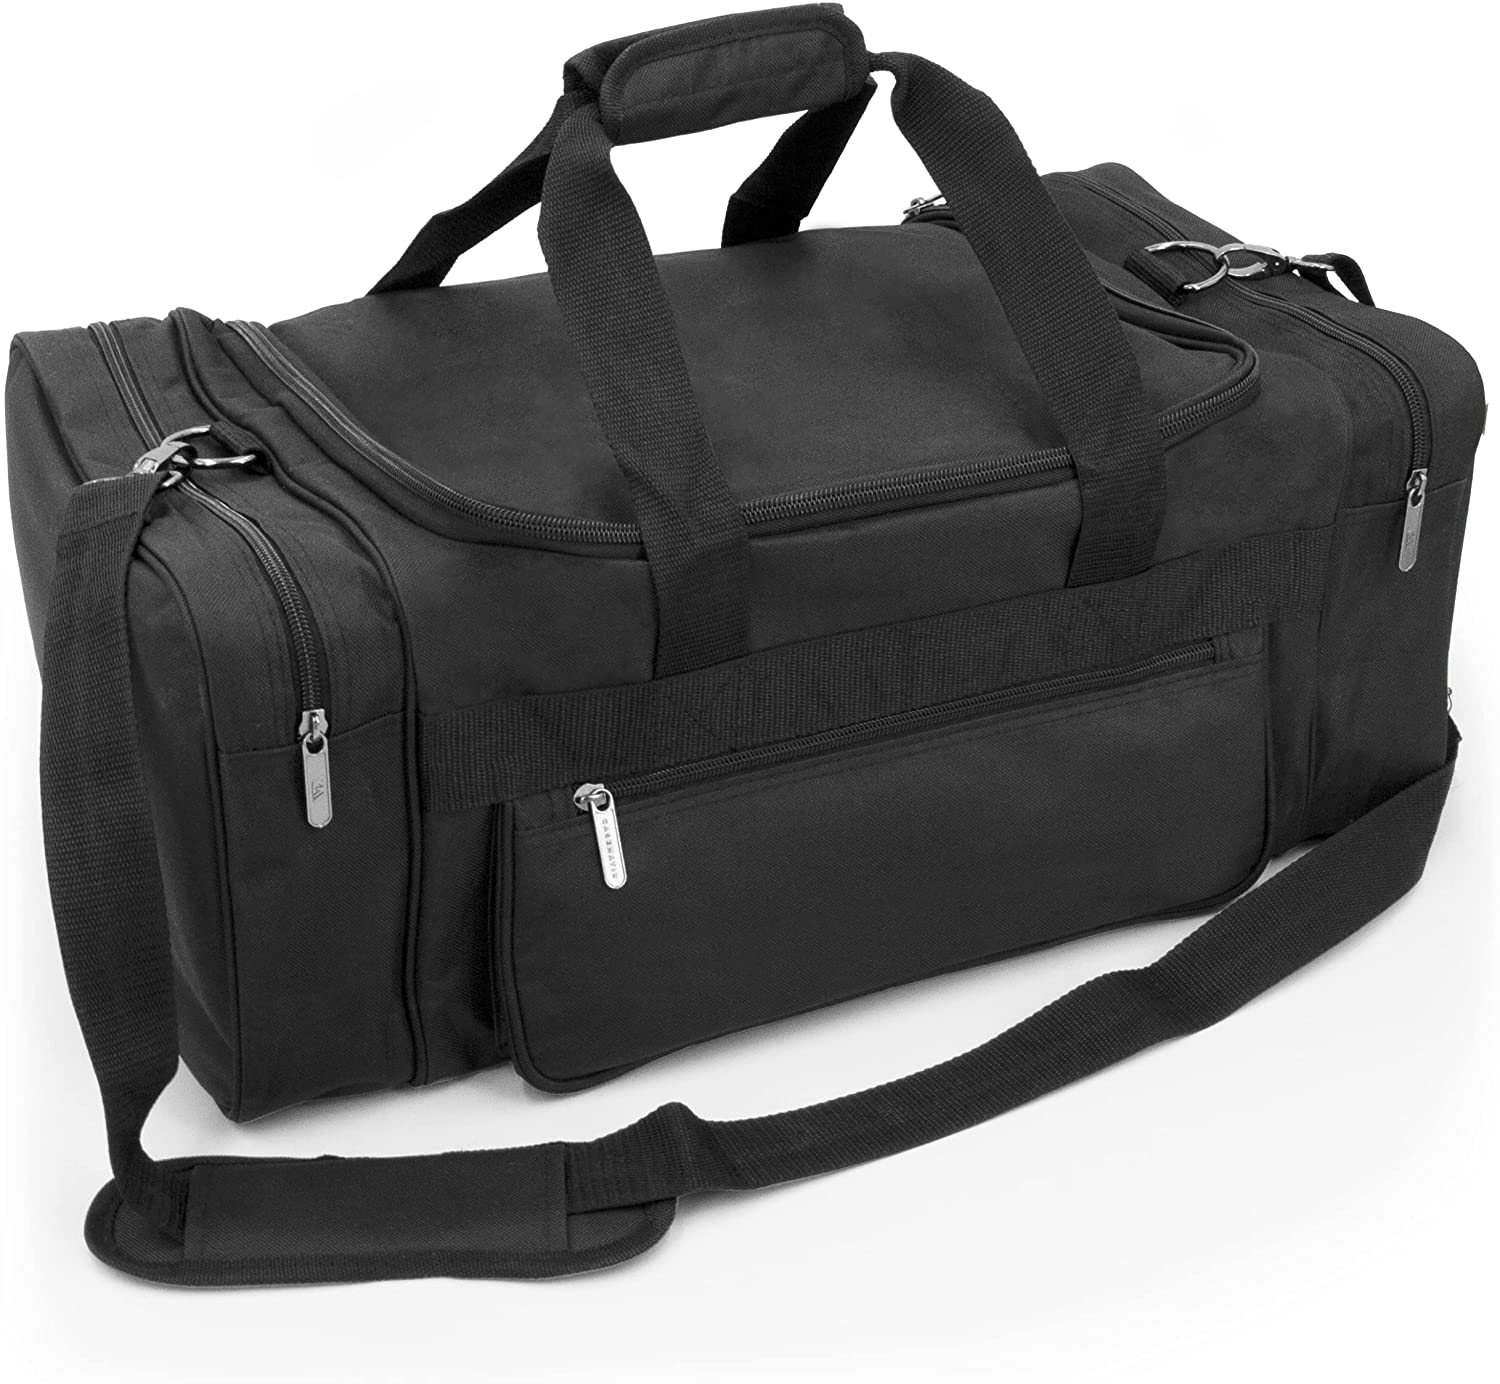 Bokimola Large Cable File Bag - 600D POLYESTER, Removable Padded Bottom and Dividers. Travel Gig Bag for Professional DJ Gear, Equipment, Musical